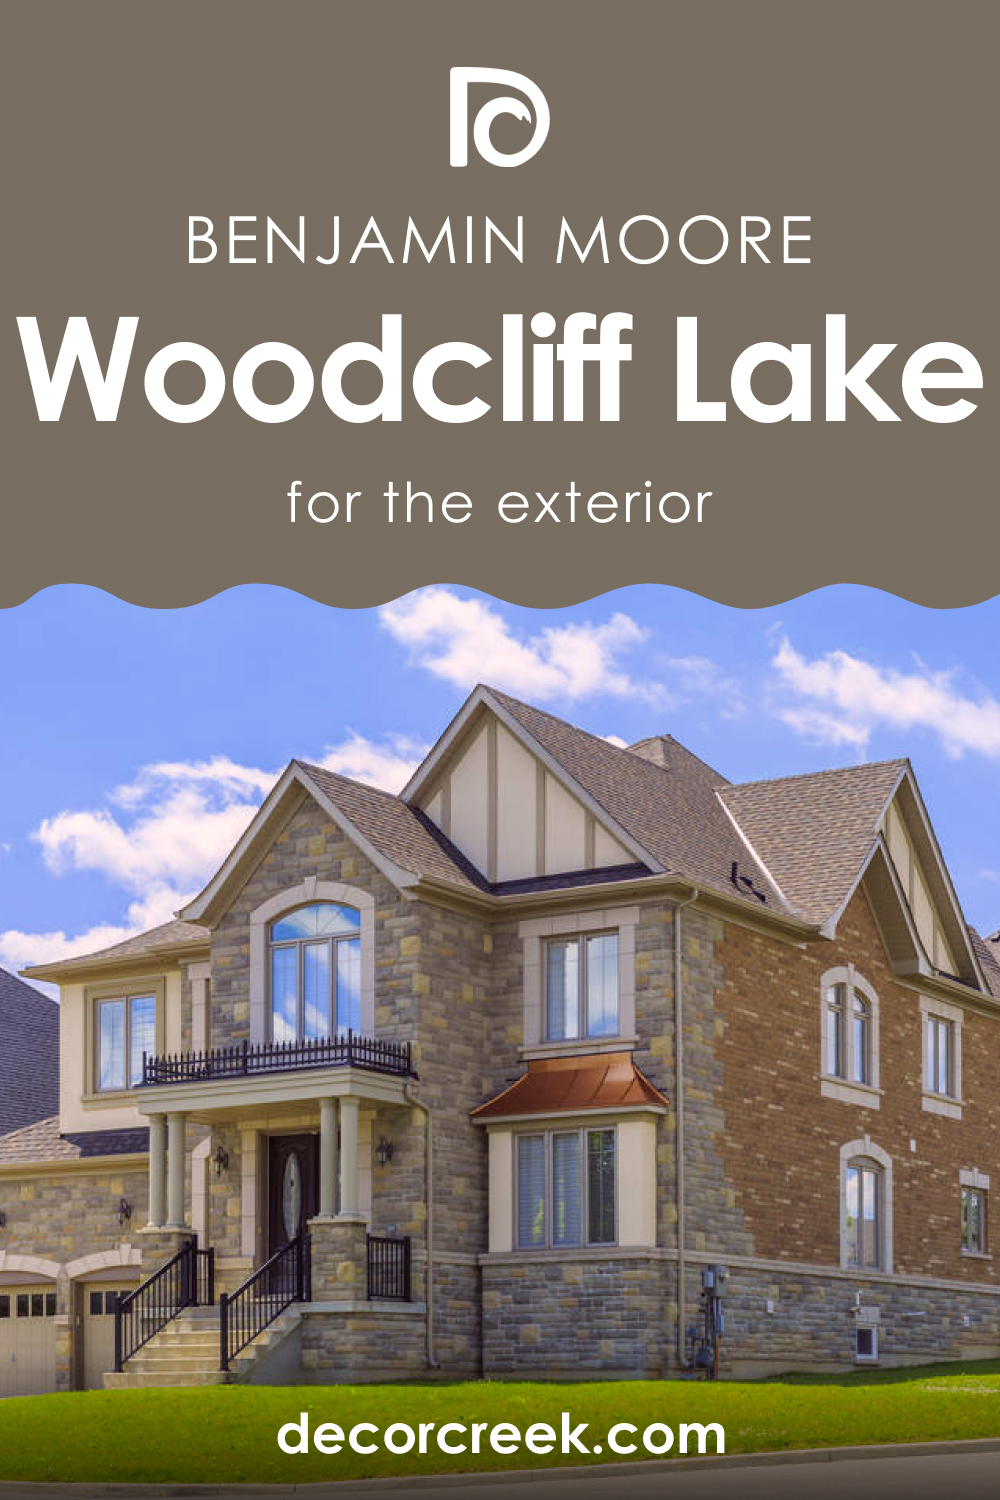 Woodcliff Lake 980 for an Exterior